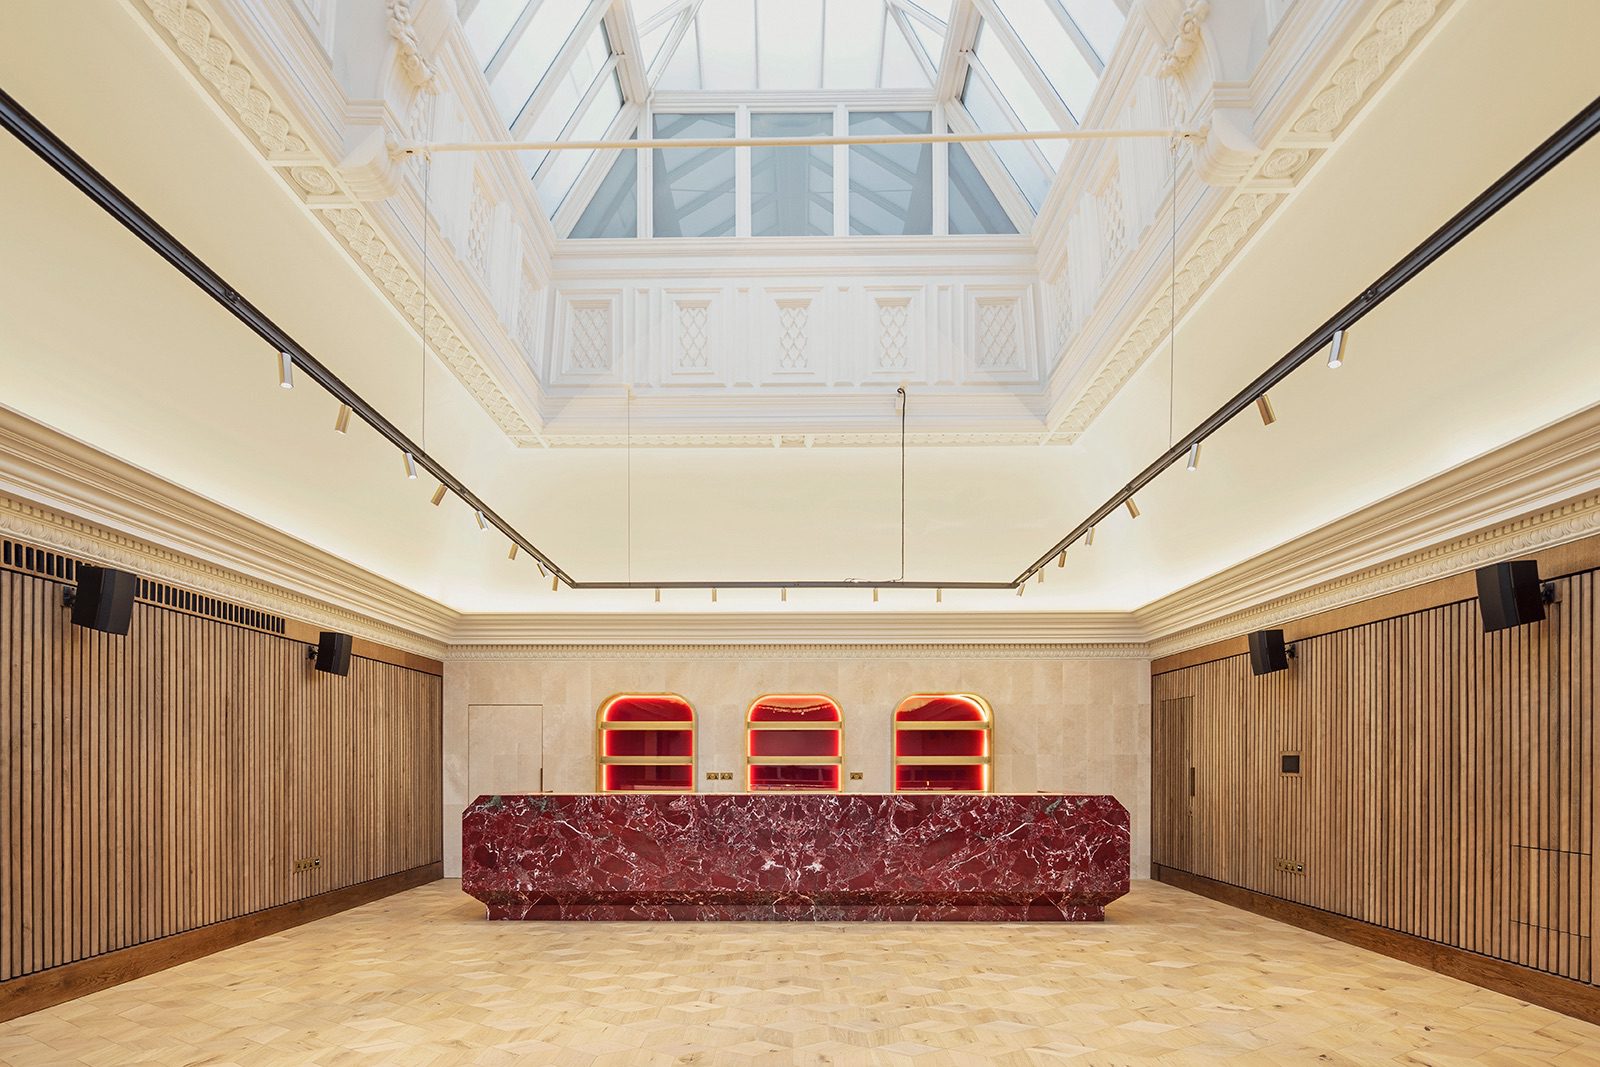 Flos' new lighting scheme for BAFTA's London HQ in a grand Grade II-listed building